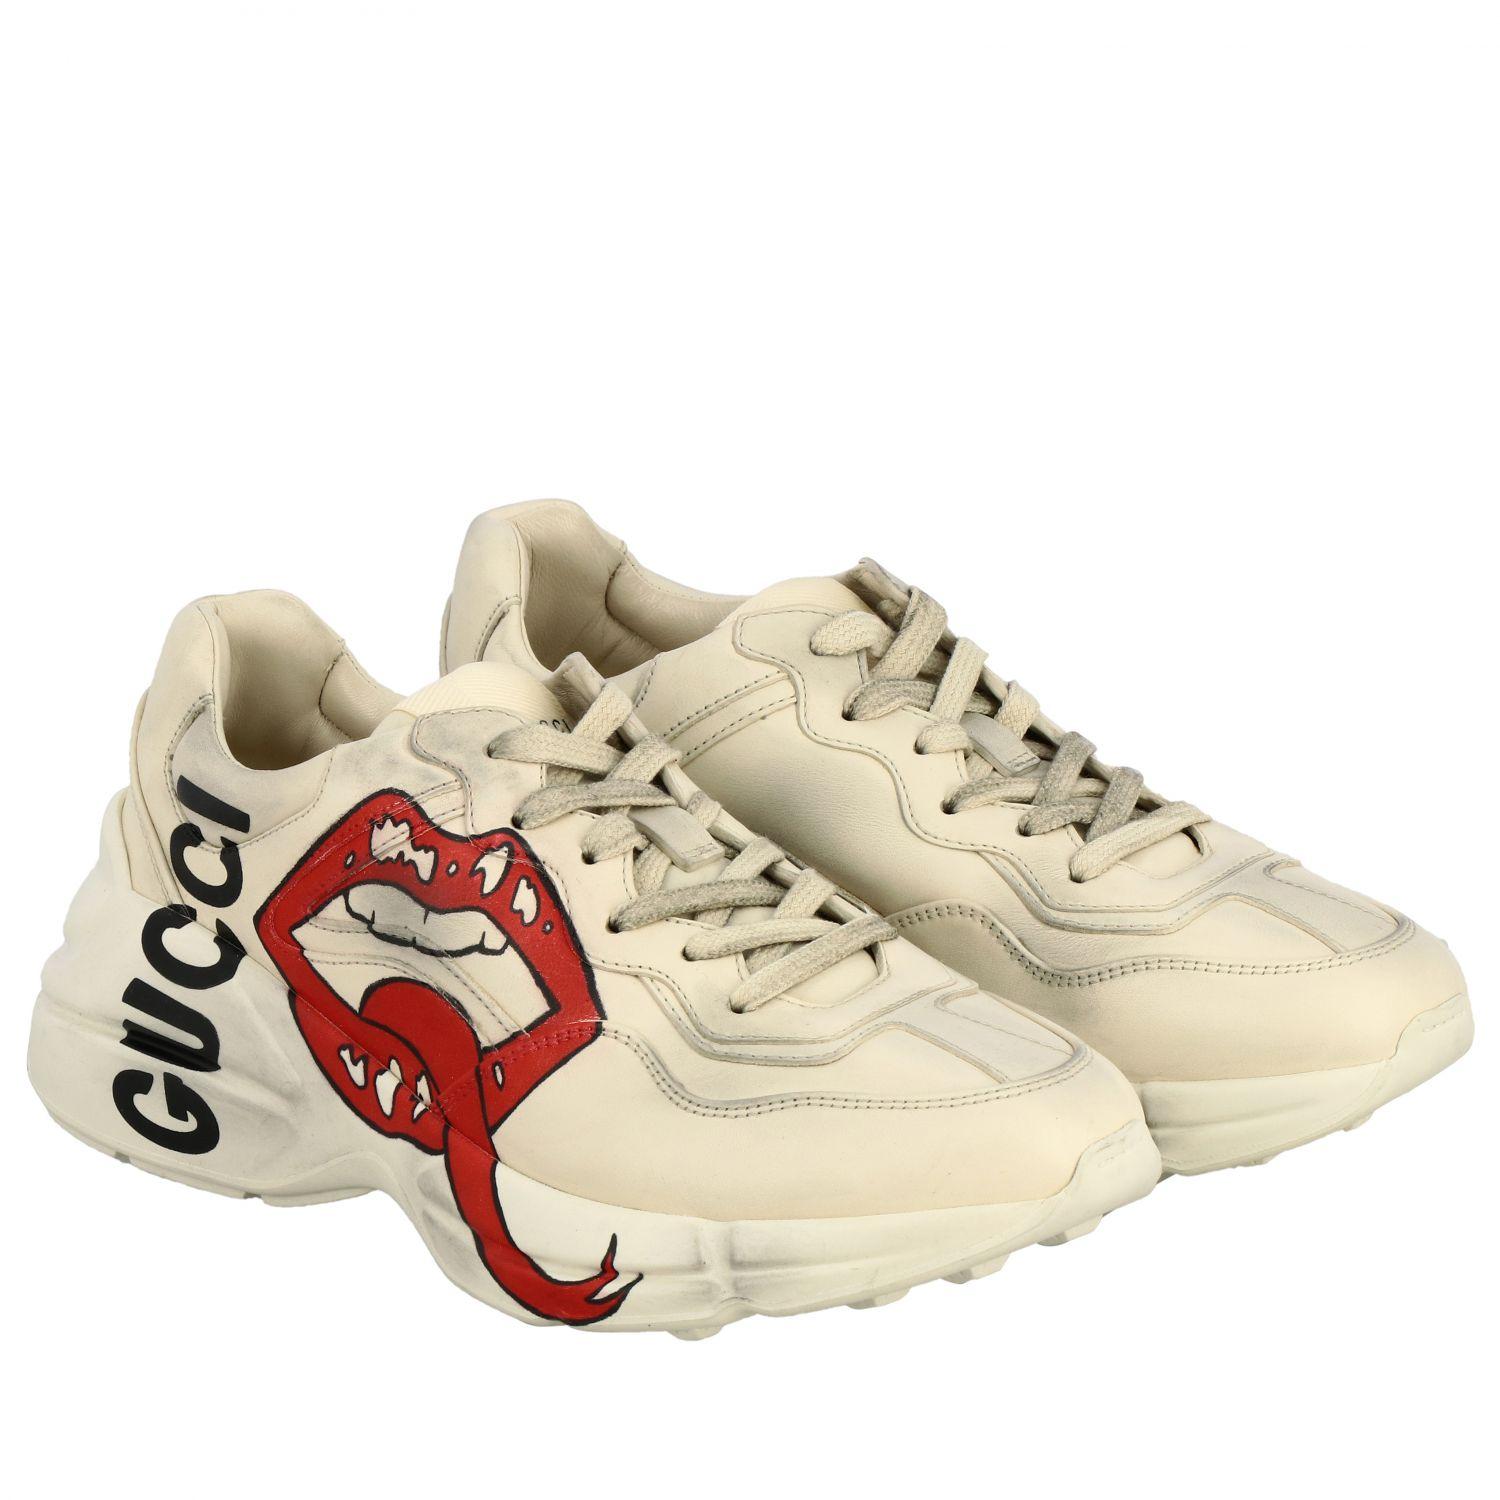 Gucci Rhyton Leather Sneakers With Maxi Mouth Print in Ivory (White) - Save  29% | Lyst